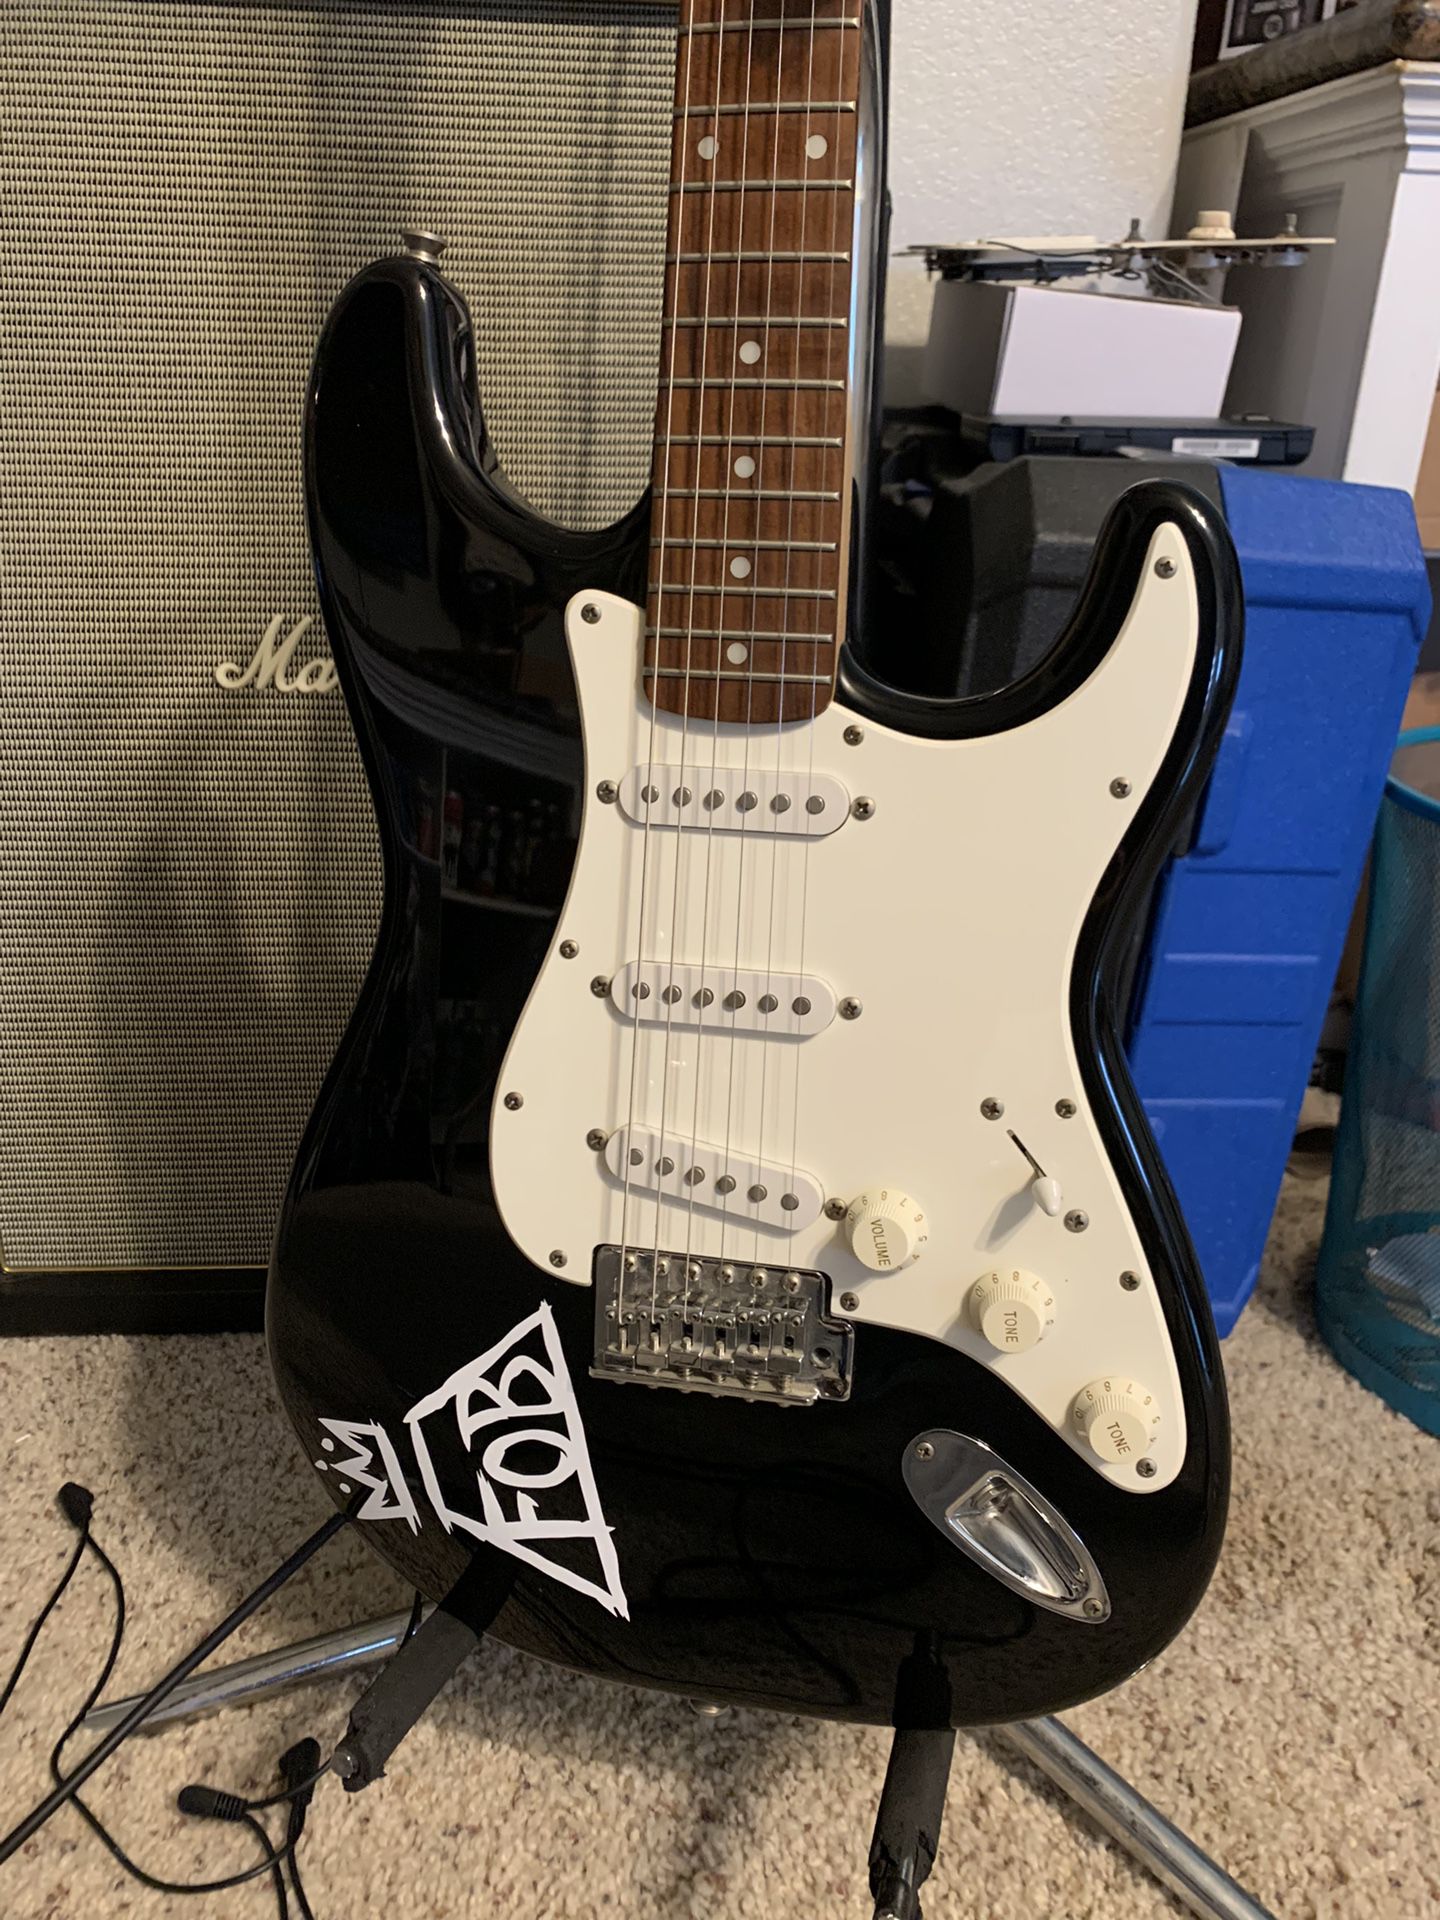 2002 Fender Squier Affinity Stratocaster / Strat Electric Guitar - Fall Out Boy - Phenomenal Condition!